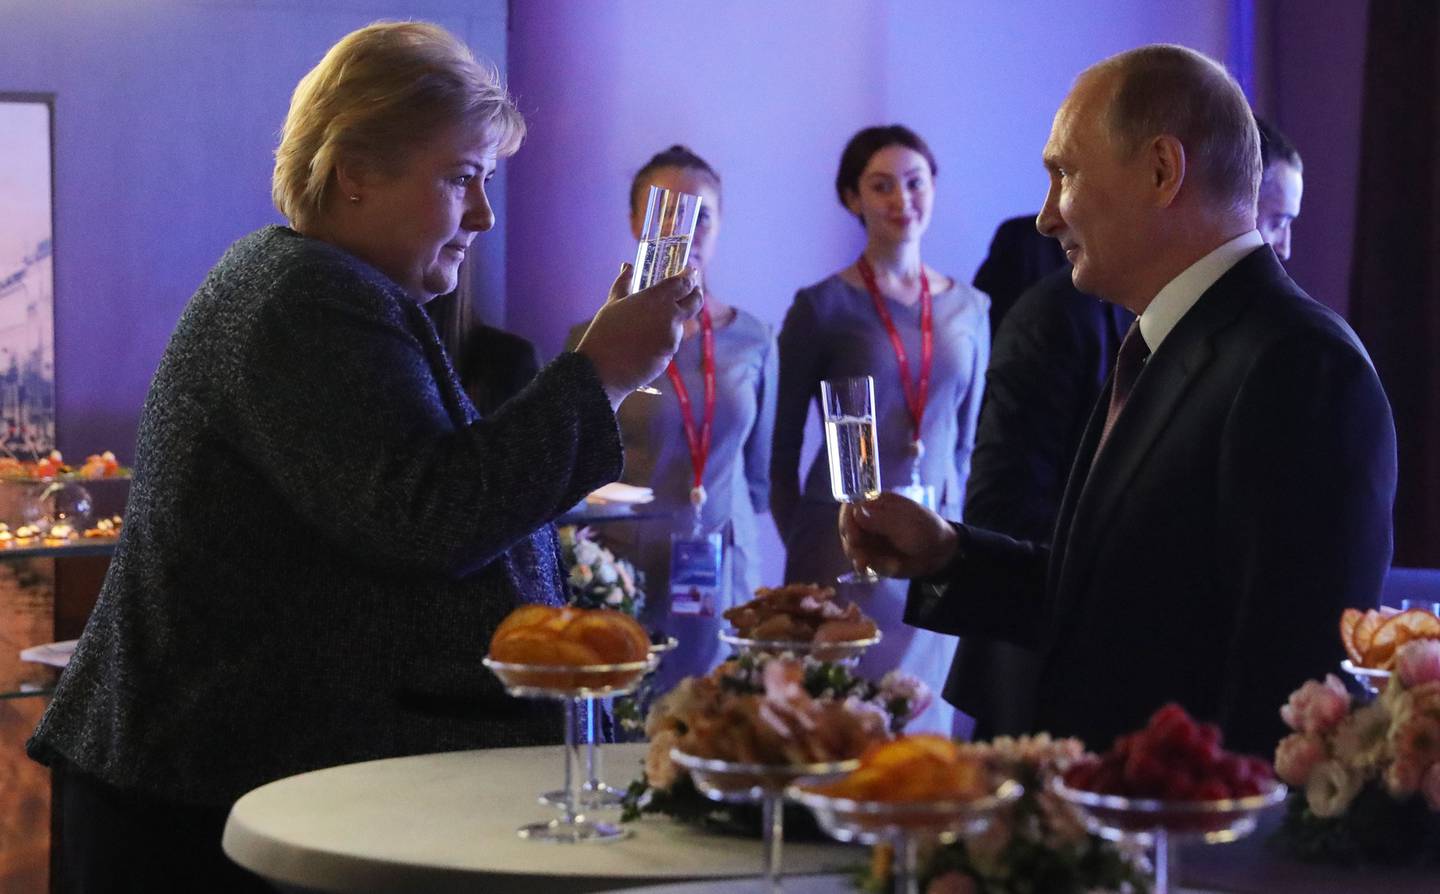 Russian President Vladimir Putin (R) and Norwegian Prime Minister Erna Solberg toast during a working dinner after the the International Arctic Forum in Saint Petersburg, on April 9, 2019. (Photo by Mikhail Klimentyev / Sputnik / AFP)